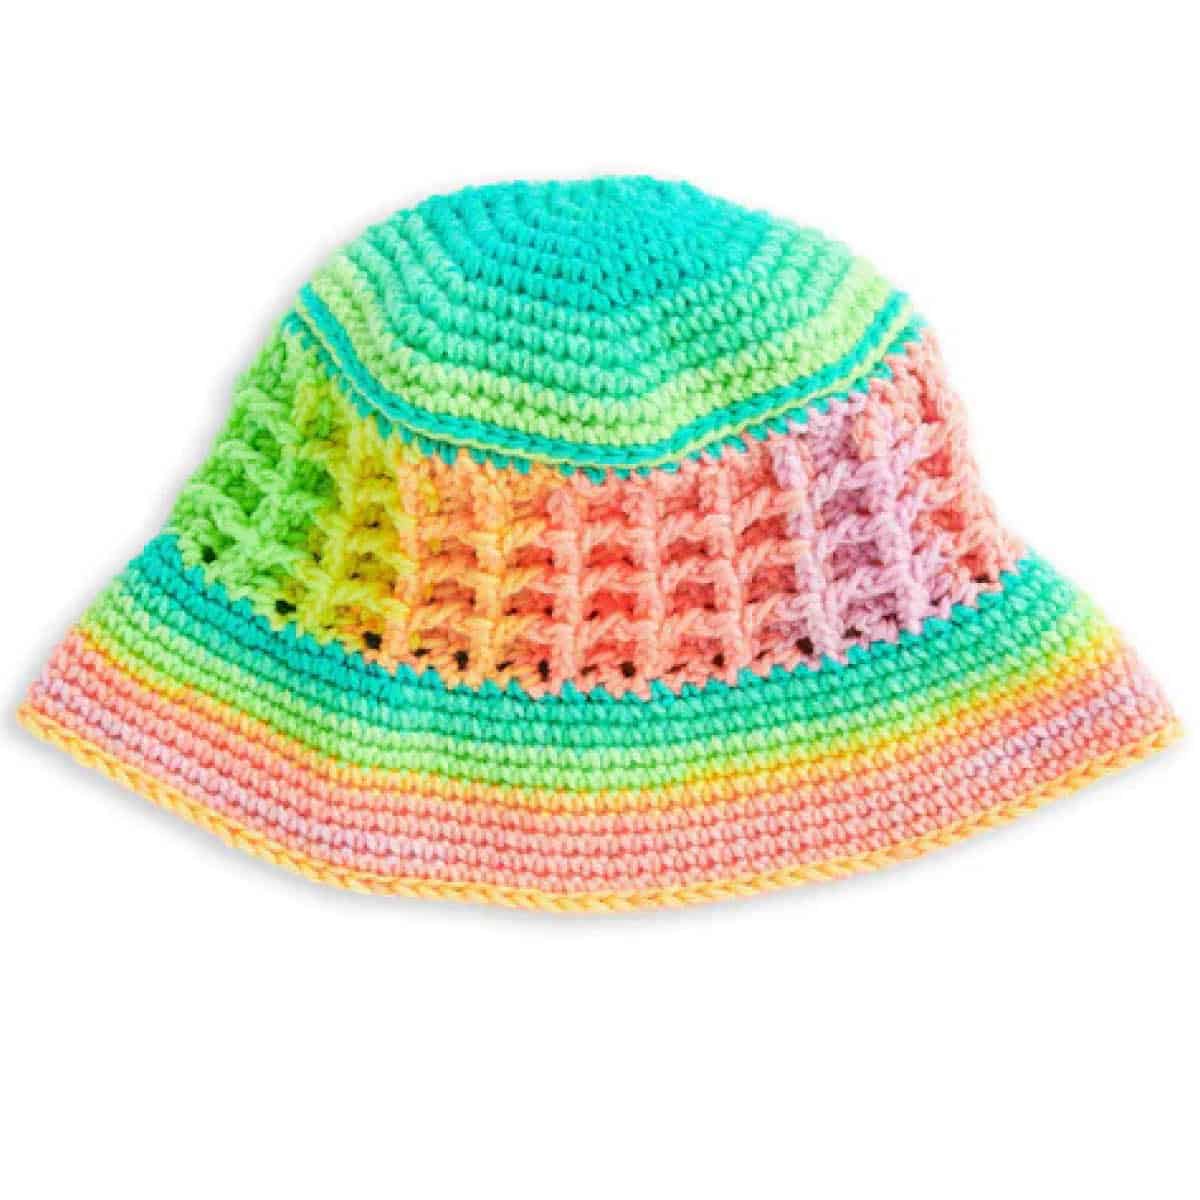 Crochet Bucket Hat with Colour Pattern